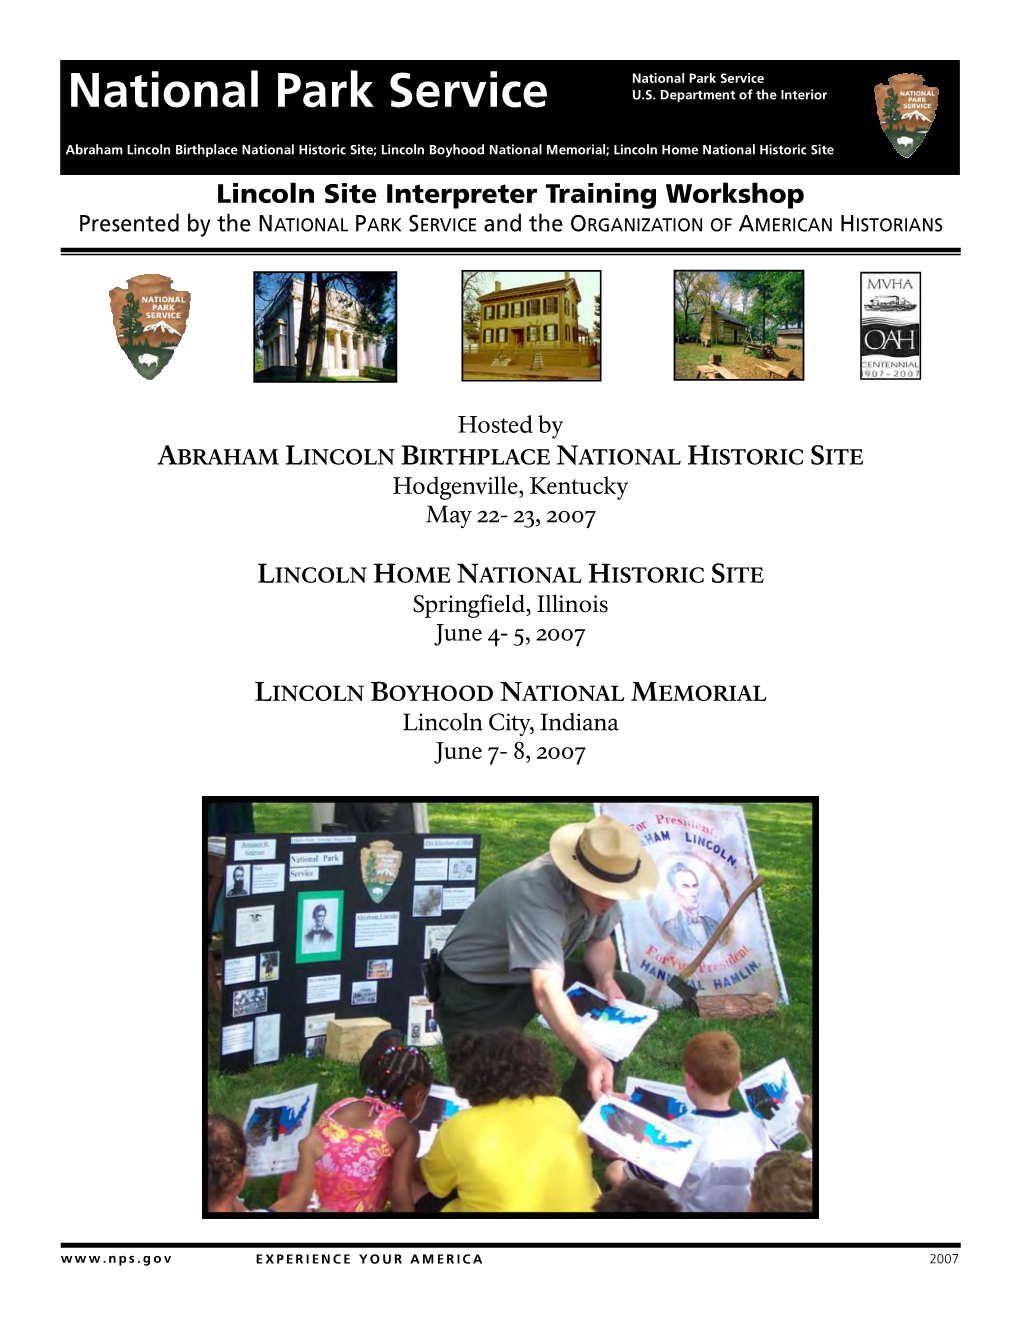 Lincoln Site Interpreter Training Workshop Presented by the NATIONAL PARK SERVICE and the ORGANIZATION of AMERICAN HISTORIANS